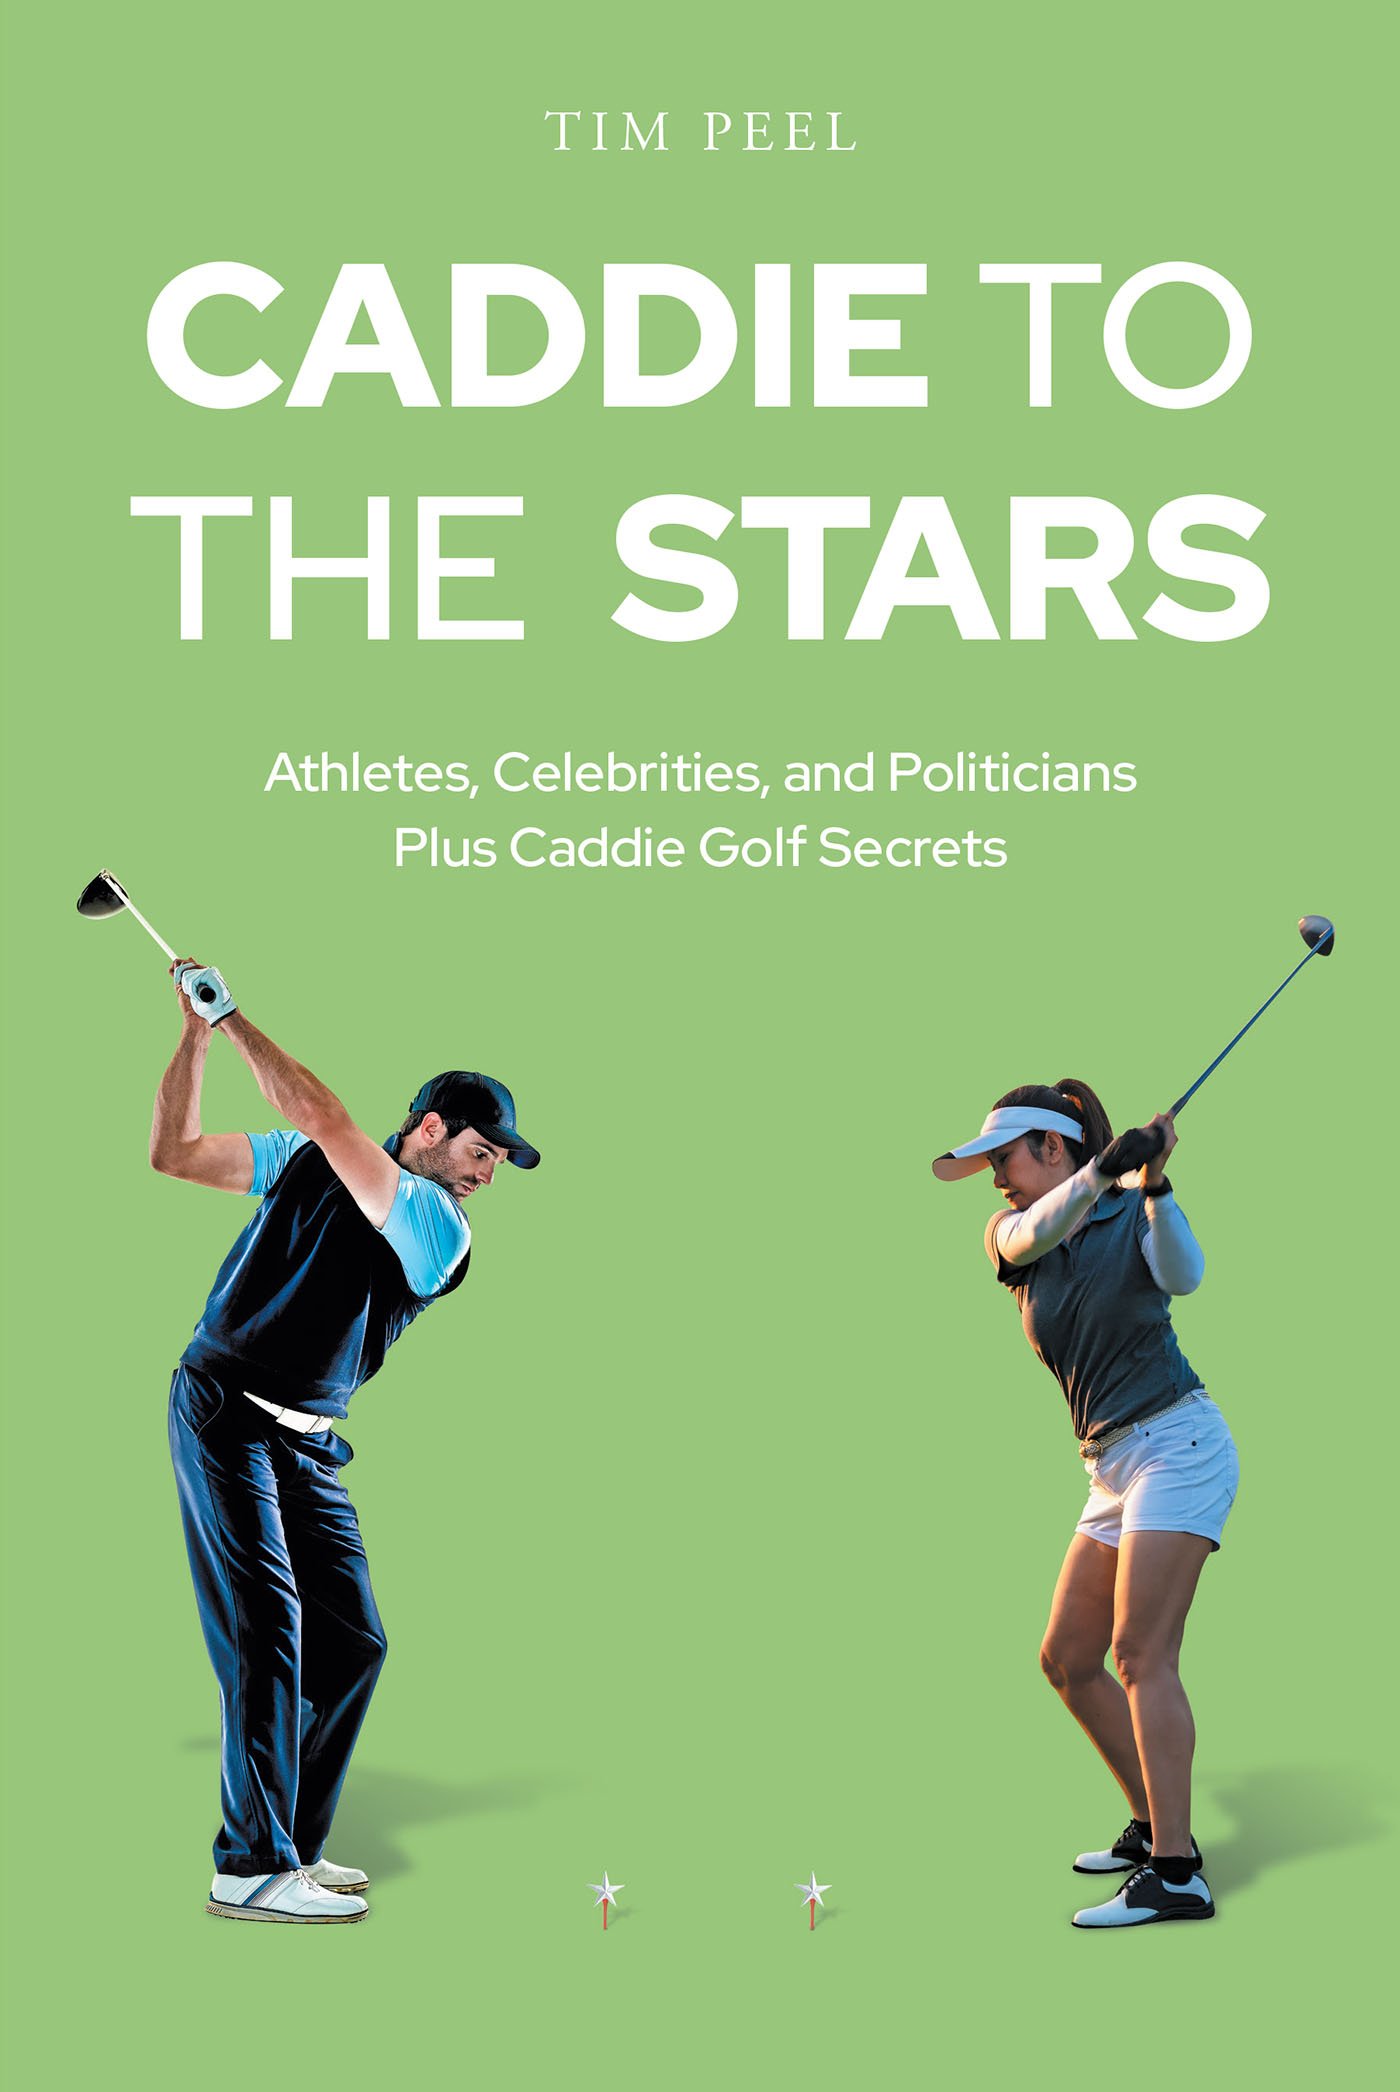 Author Tim Peel’s New Book "Caddie to the Stars: Athletes, Celebrities, and Politicians Plus Caddie Golf Secrets" Reveals the Fascinating Life That Golf Caddies Can Live